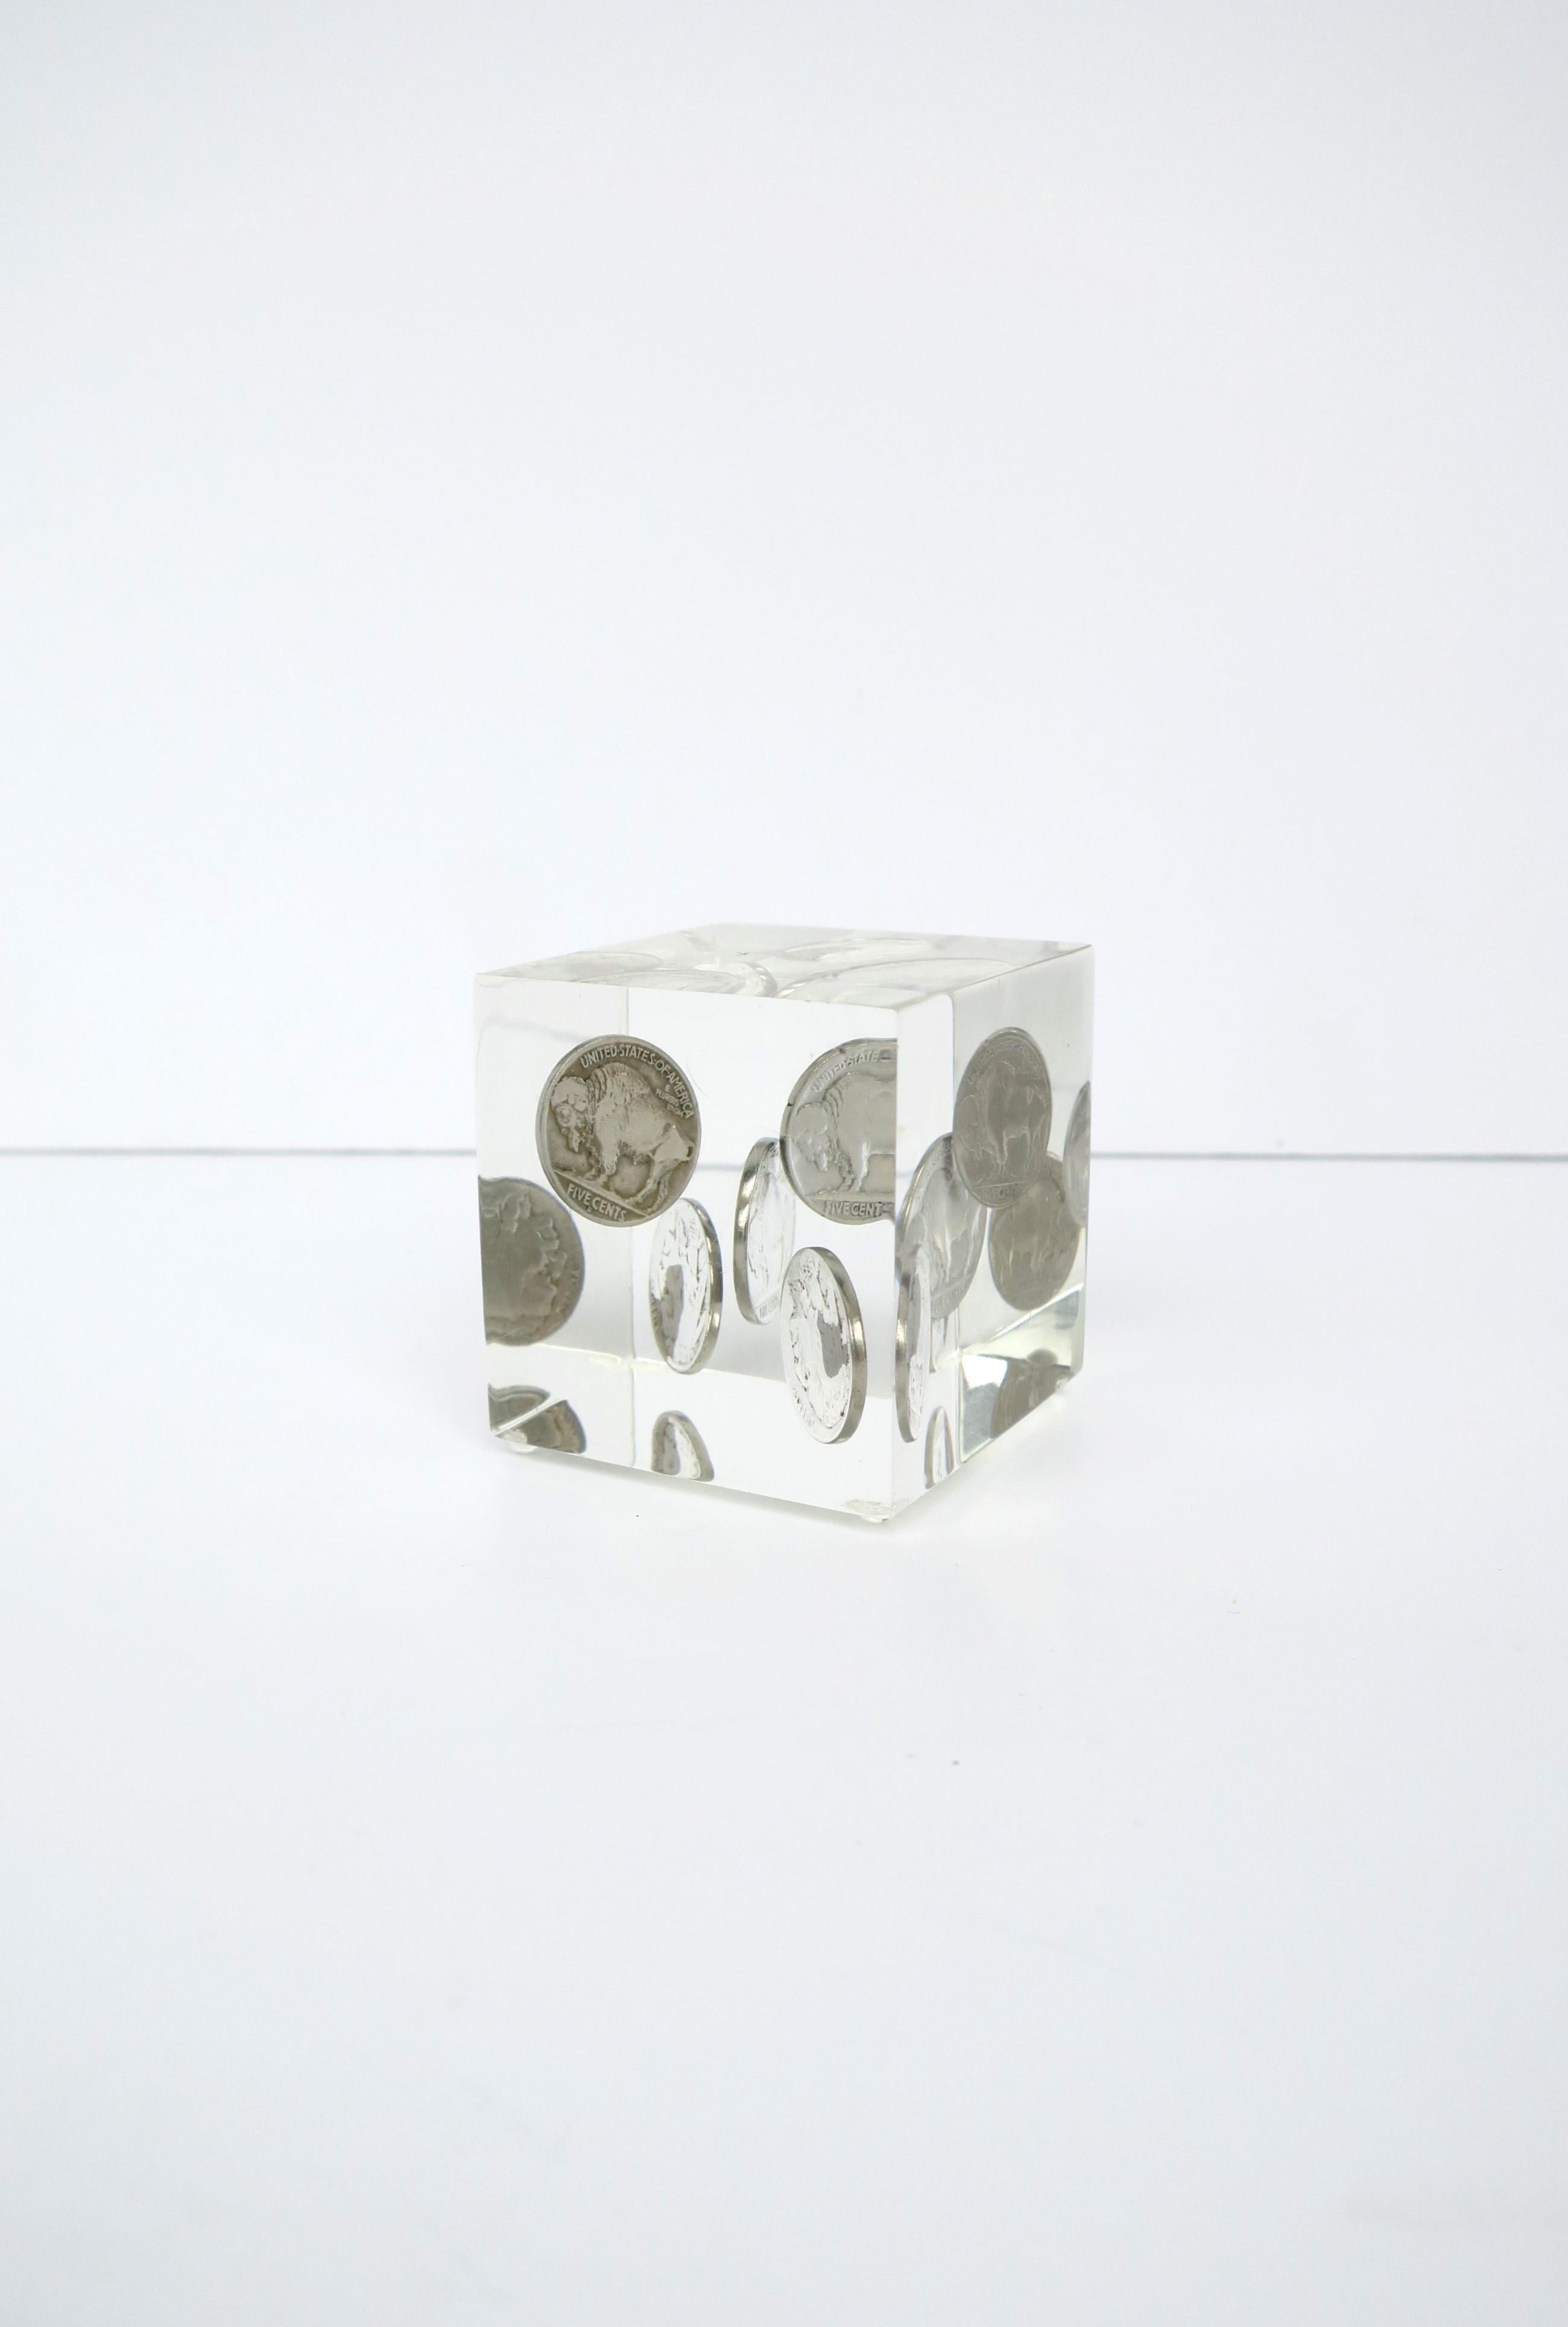 A Lucite cube, with Buffalo-Indian head nickel coins, desk paperweight or decorative object, circa late 20th century. Cube contains five 5-cent Buffalo Indian head coins with the following years: 1934, 1935, 1936, 1937 and 1938. A great piece for a